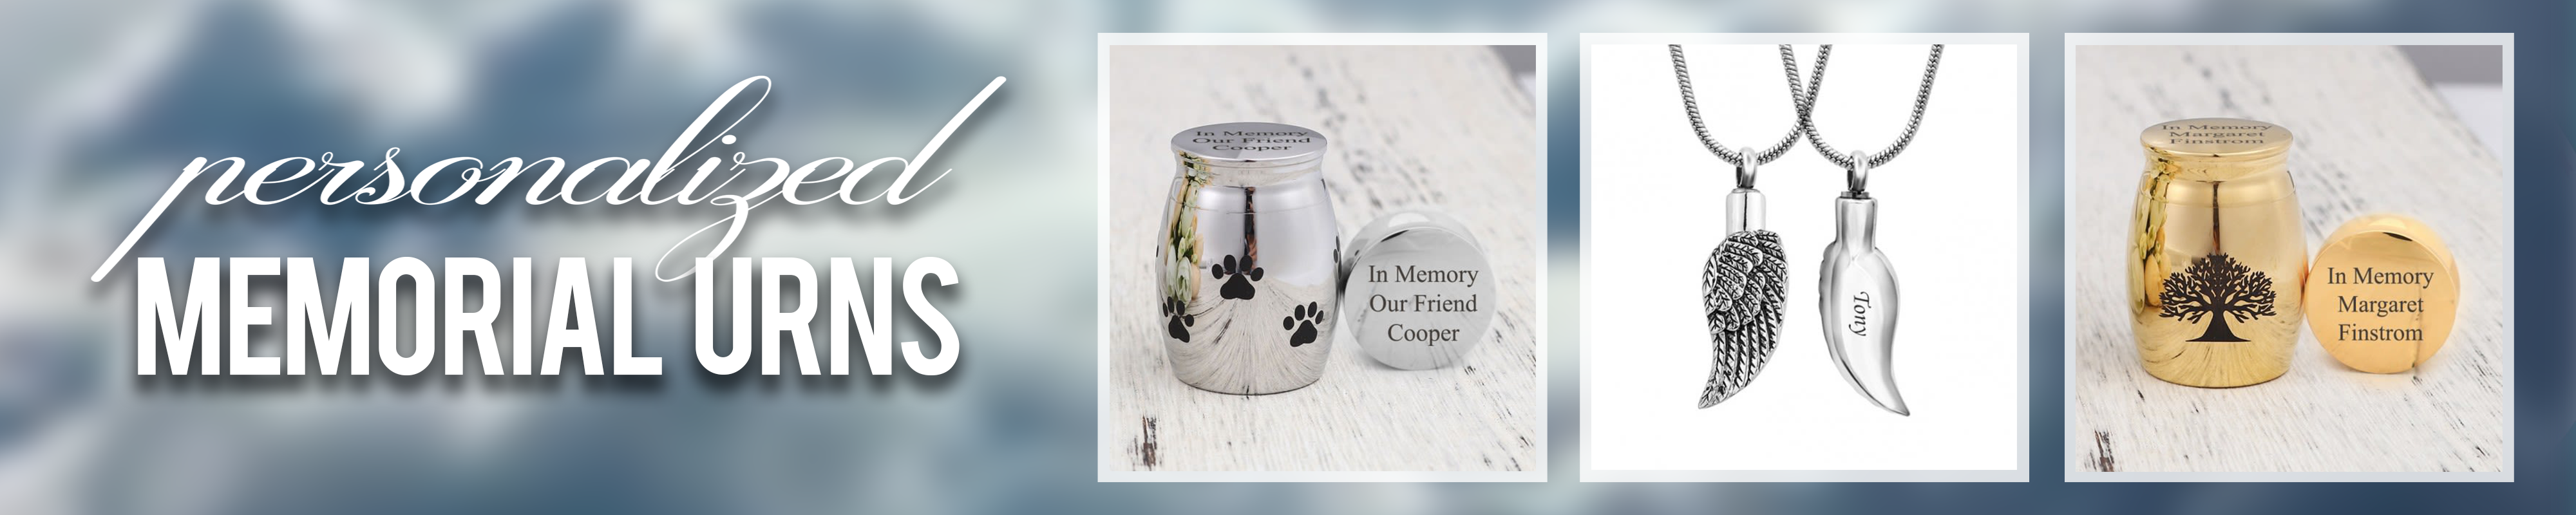 Personalized Cremation Urns | Personalized Urns